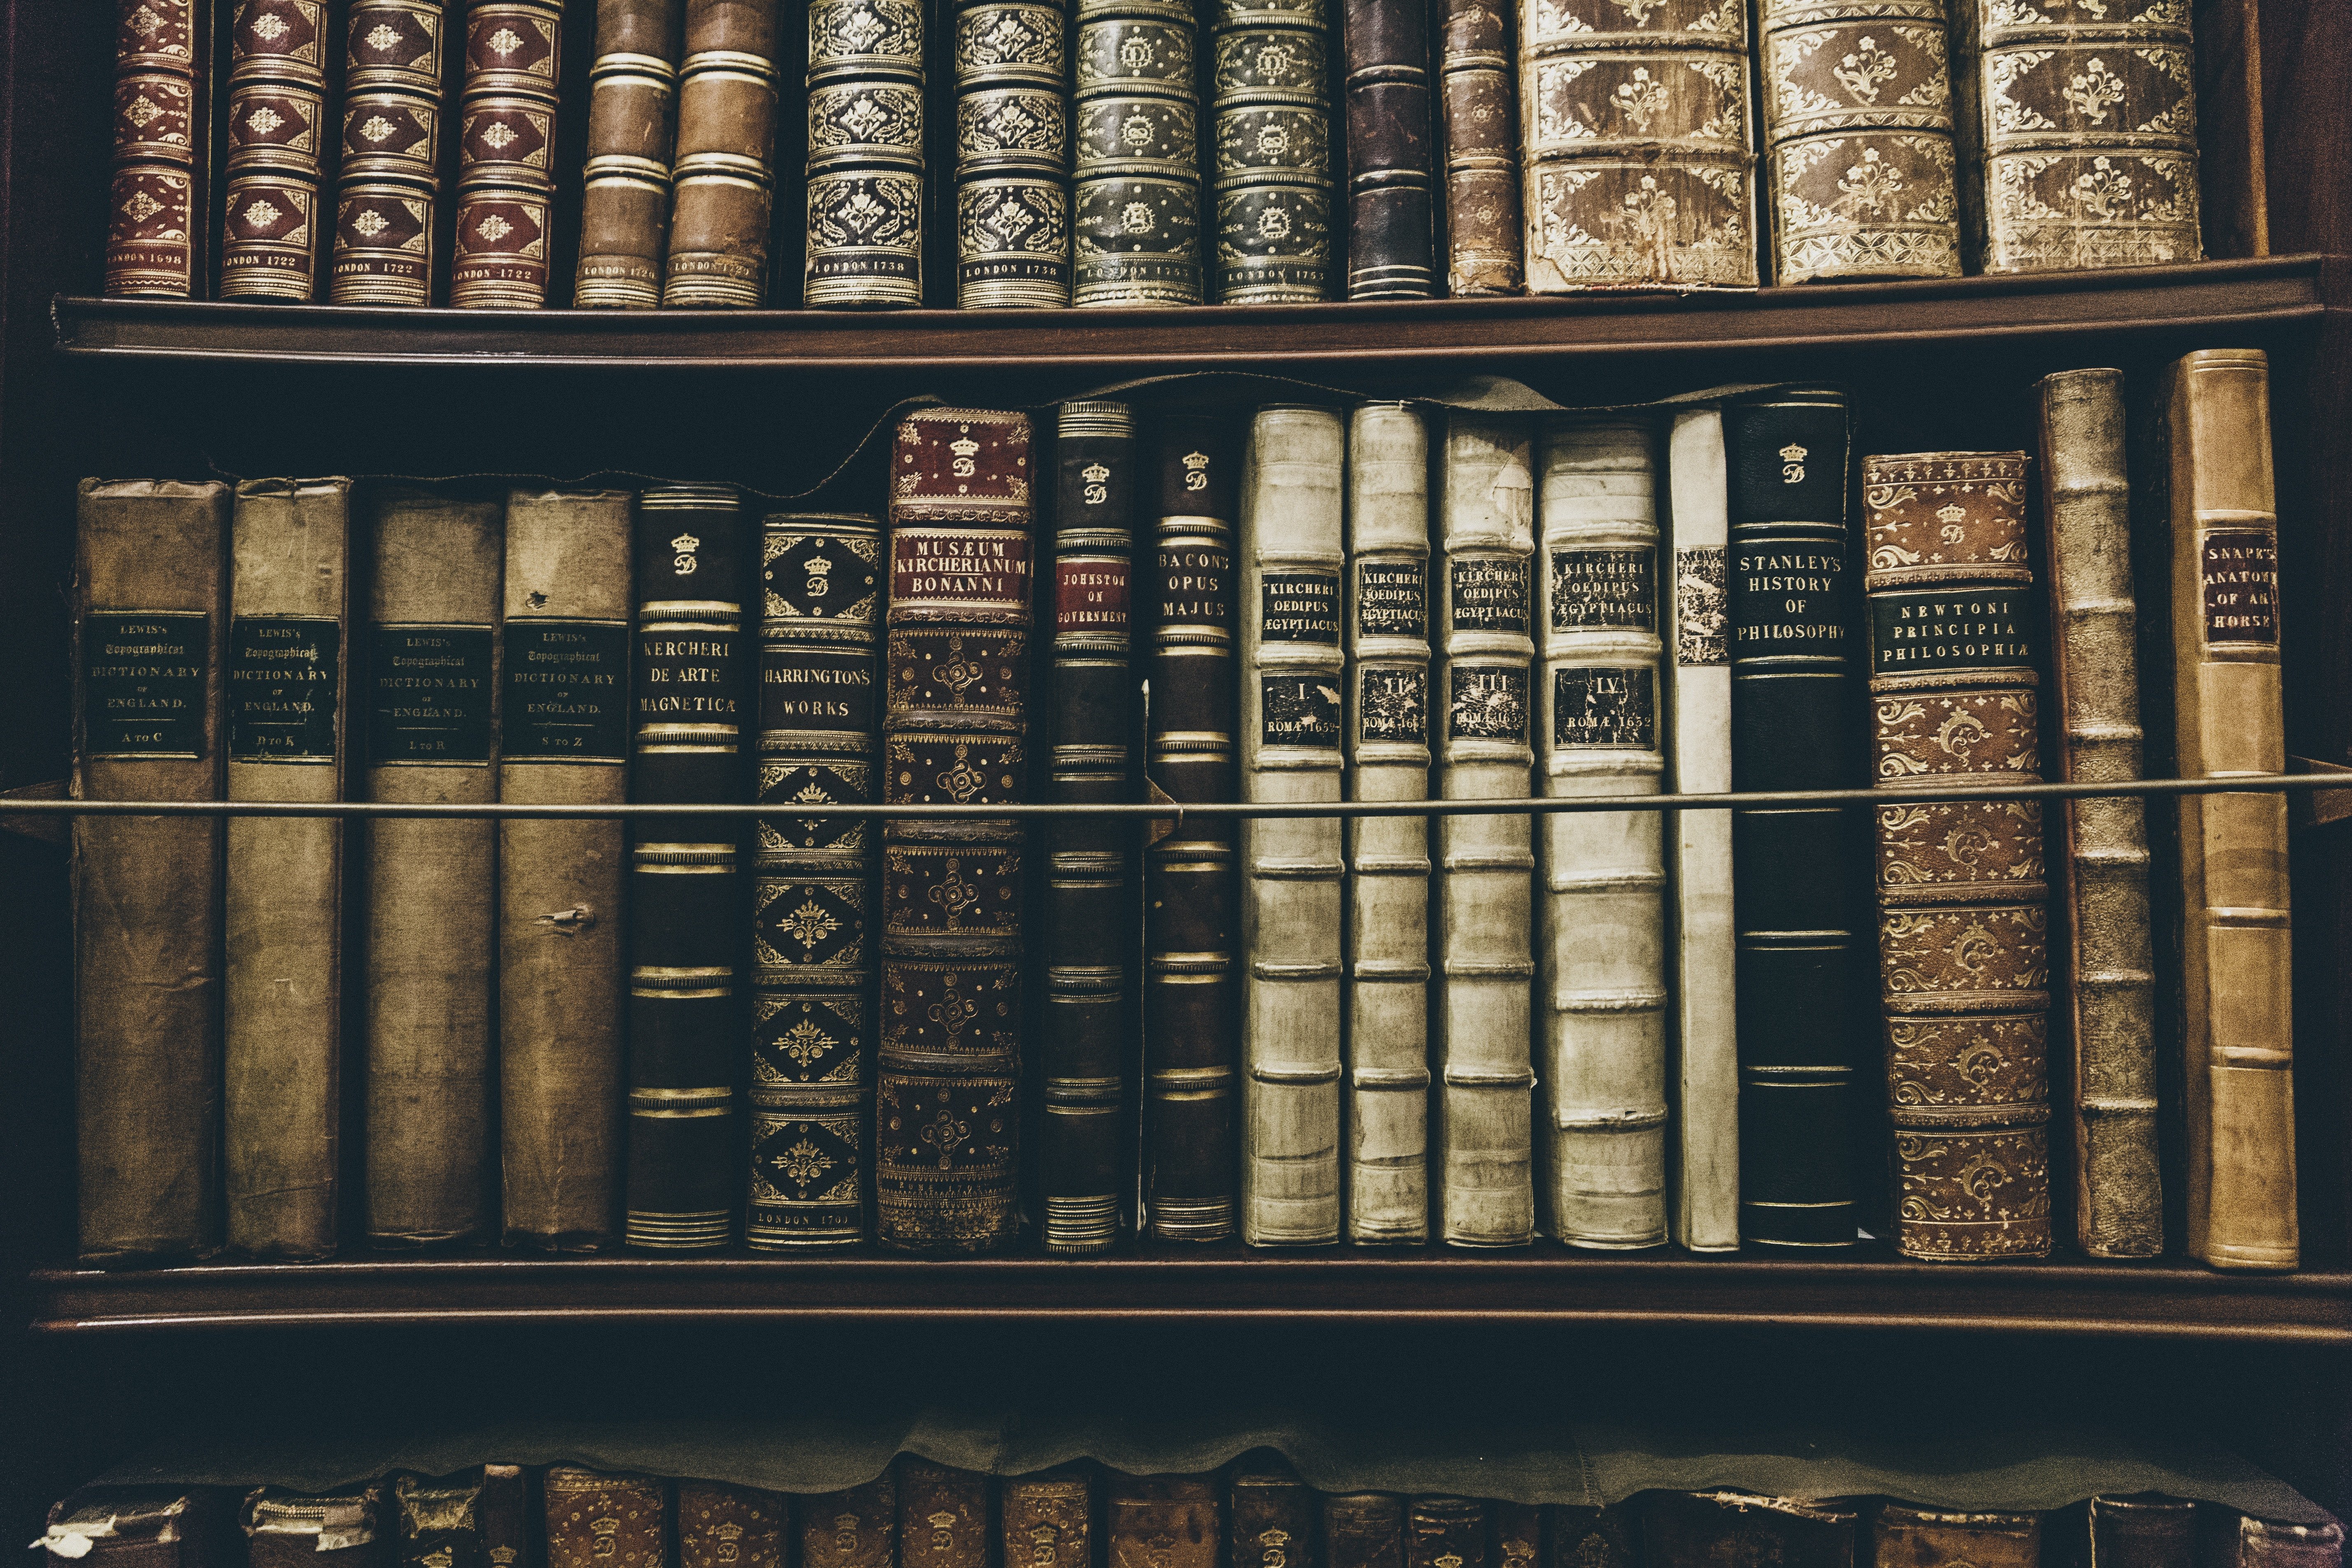 5713x3809 #collection, #spine, #history, #mercantile establishment, #colorful, #old, #business, #finance, #edition, #Free image, #cover, #shelf, #book, #library, #color, #device, #antique, d, #bookcase, #place of business, #shop. Mocah HD